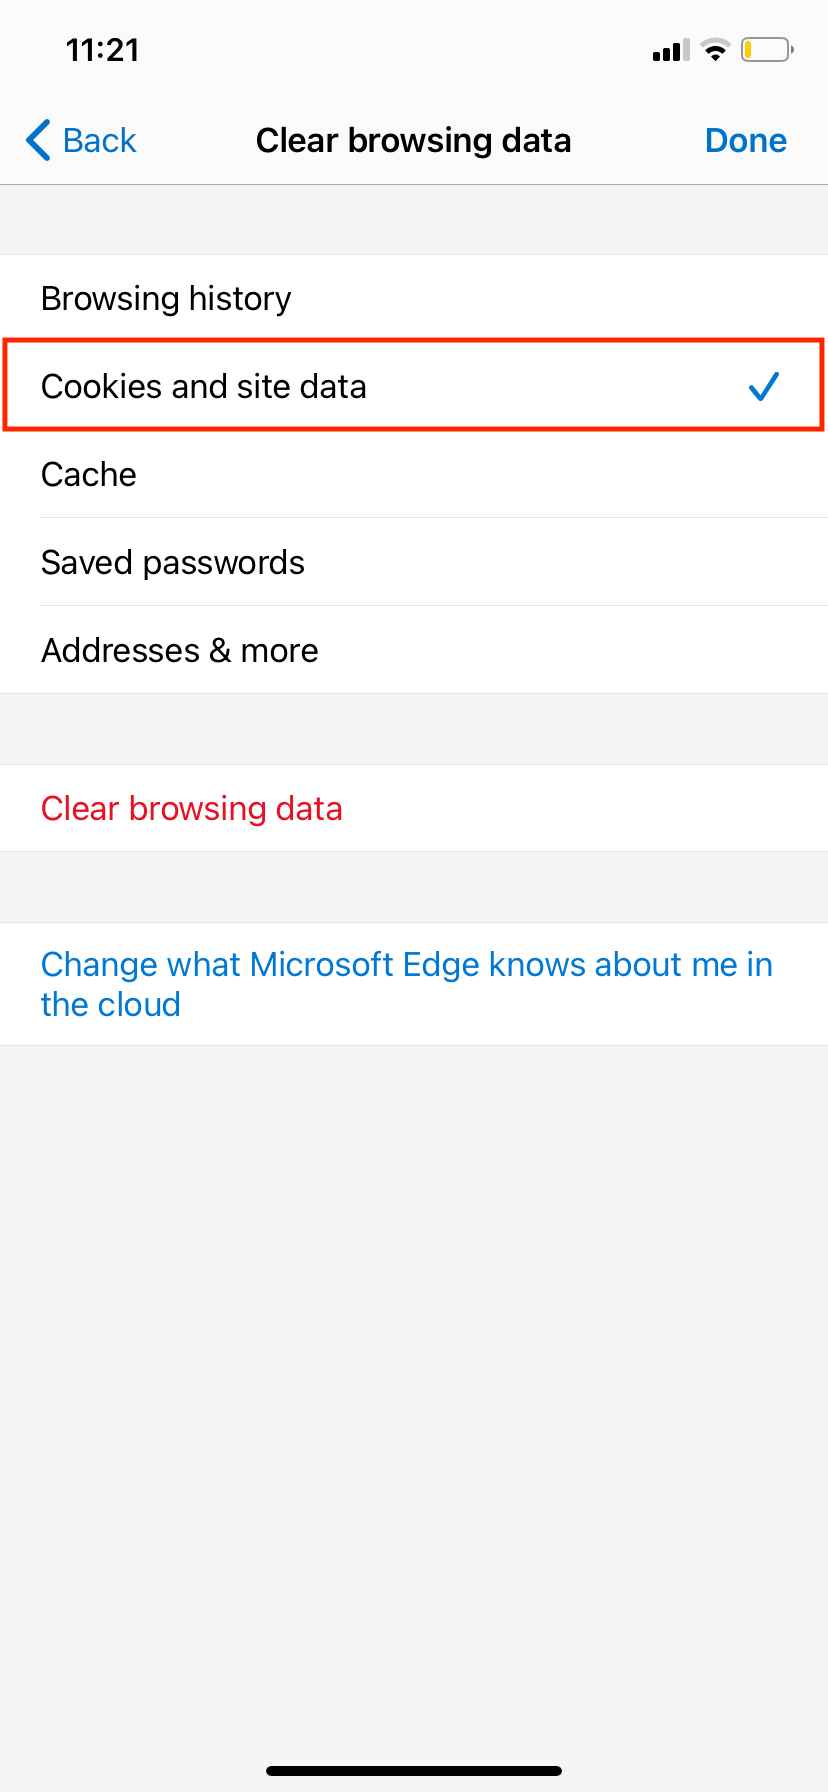 delete cookies and site data on Microsoft Edge iPhone